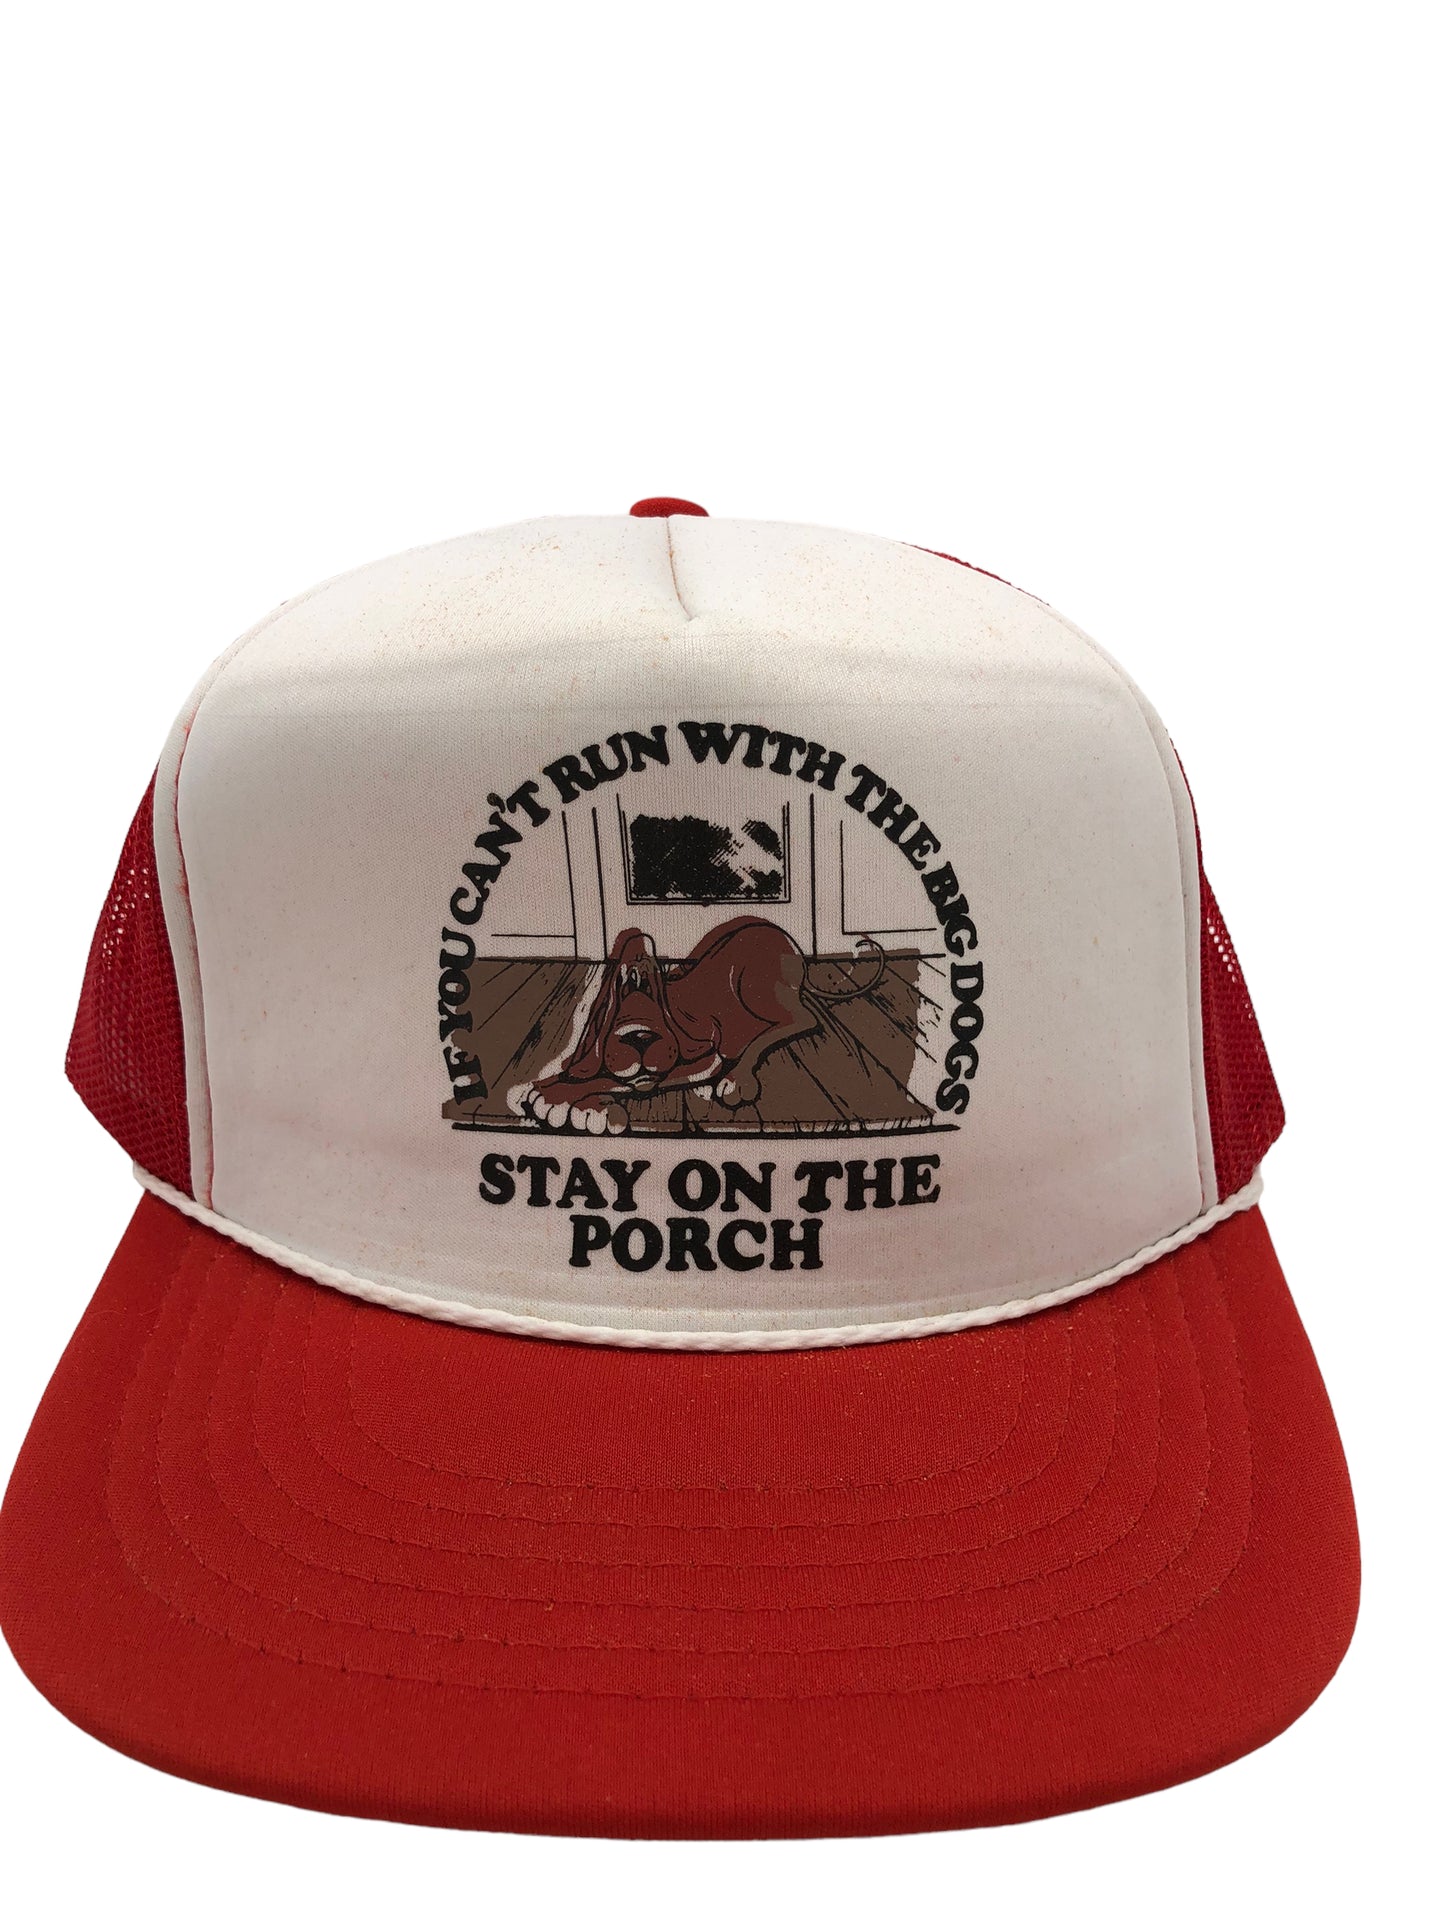 VTG Can't Run With The Big Dogs Trucker Hat